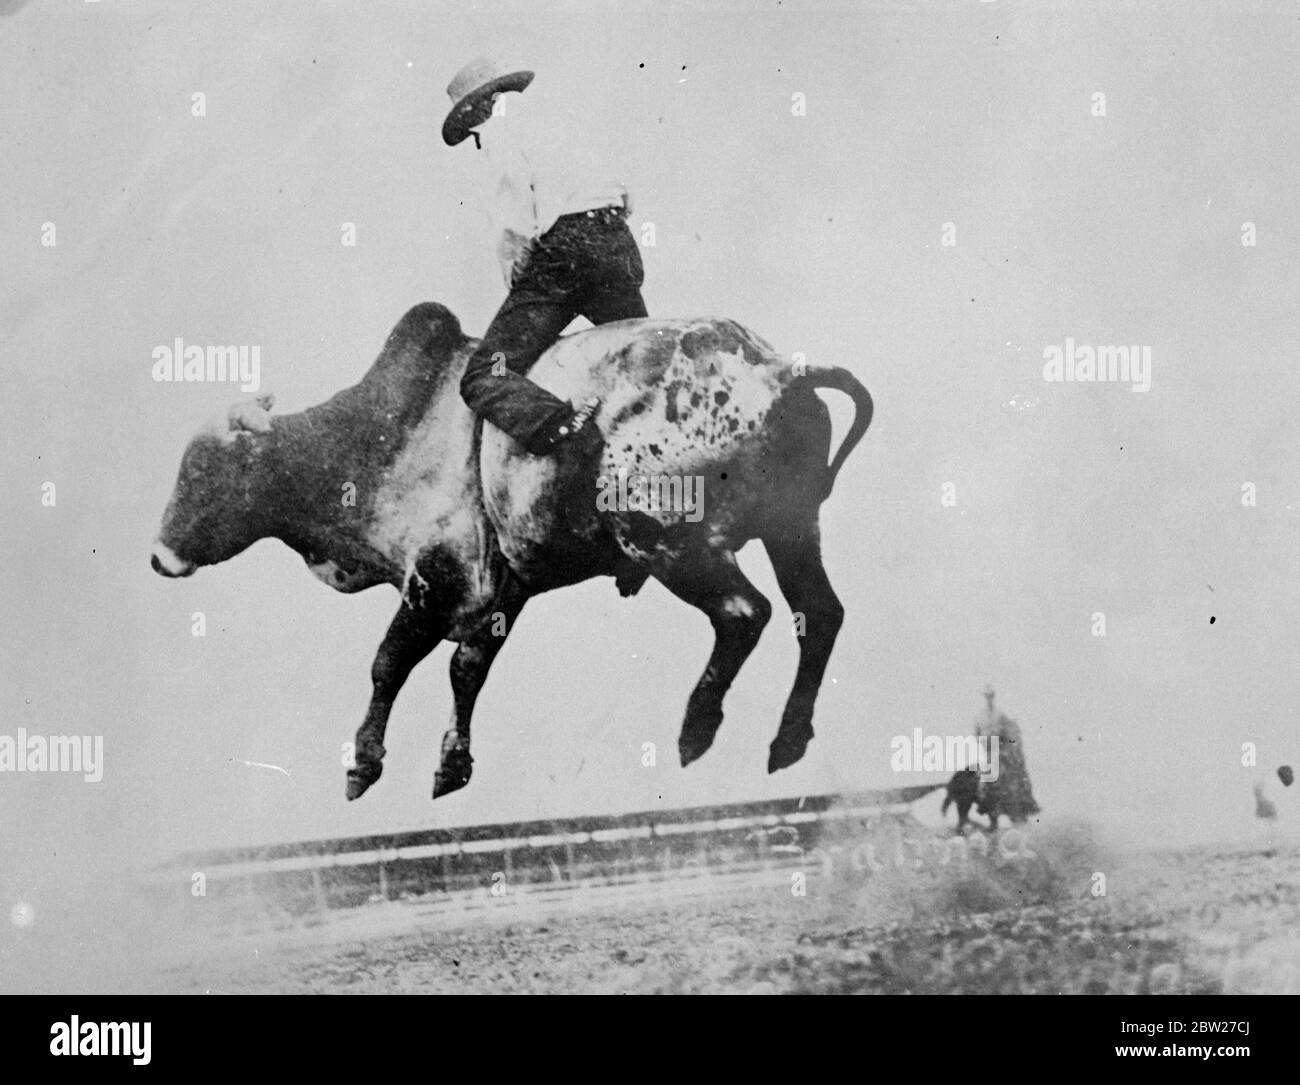 A half wild Brahma steer lifts all hooves four hoofs off the ground and appears to clear the grandstand in a victorius buck he attempts to unseat the cowpuncher clinging grimly to his knife edge back at a Cheyenne, Wyoming Rodeo 15 July 1937. Stock Photo